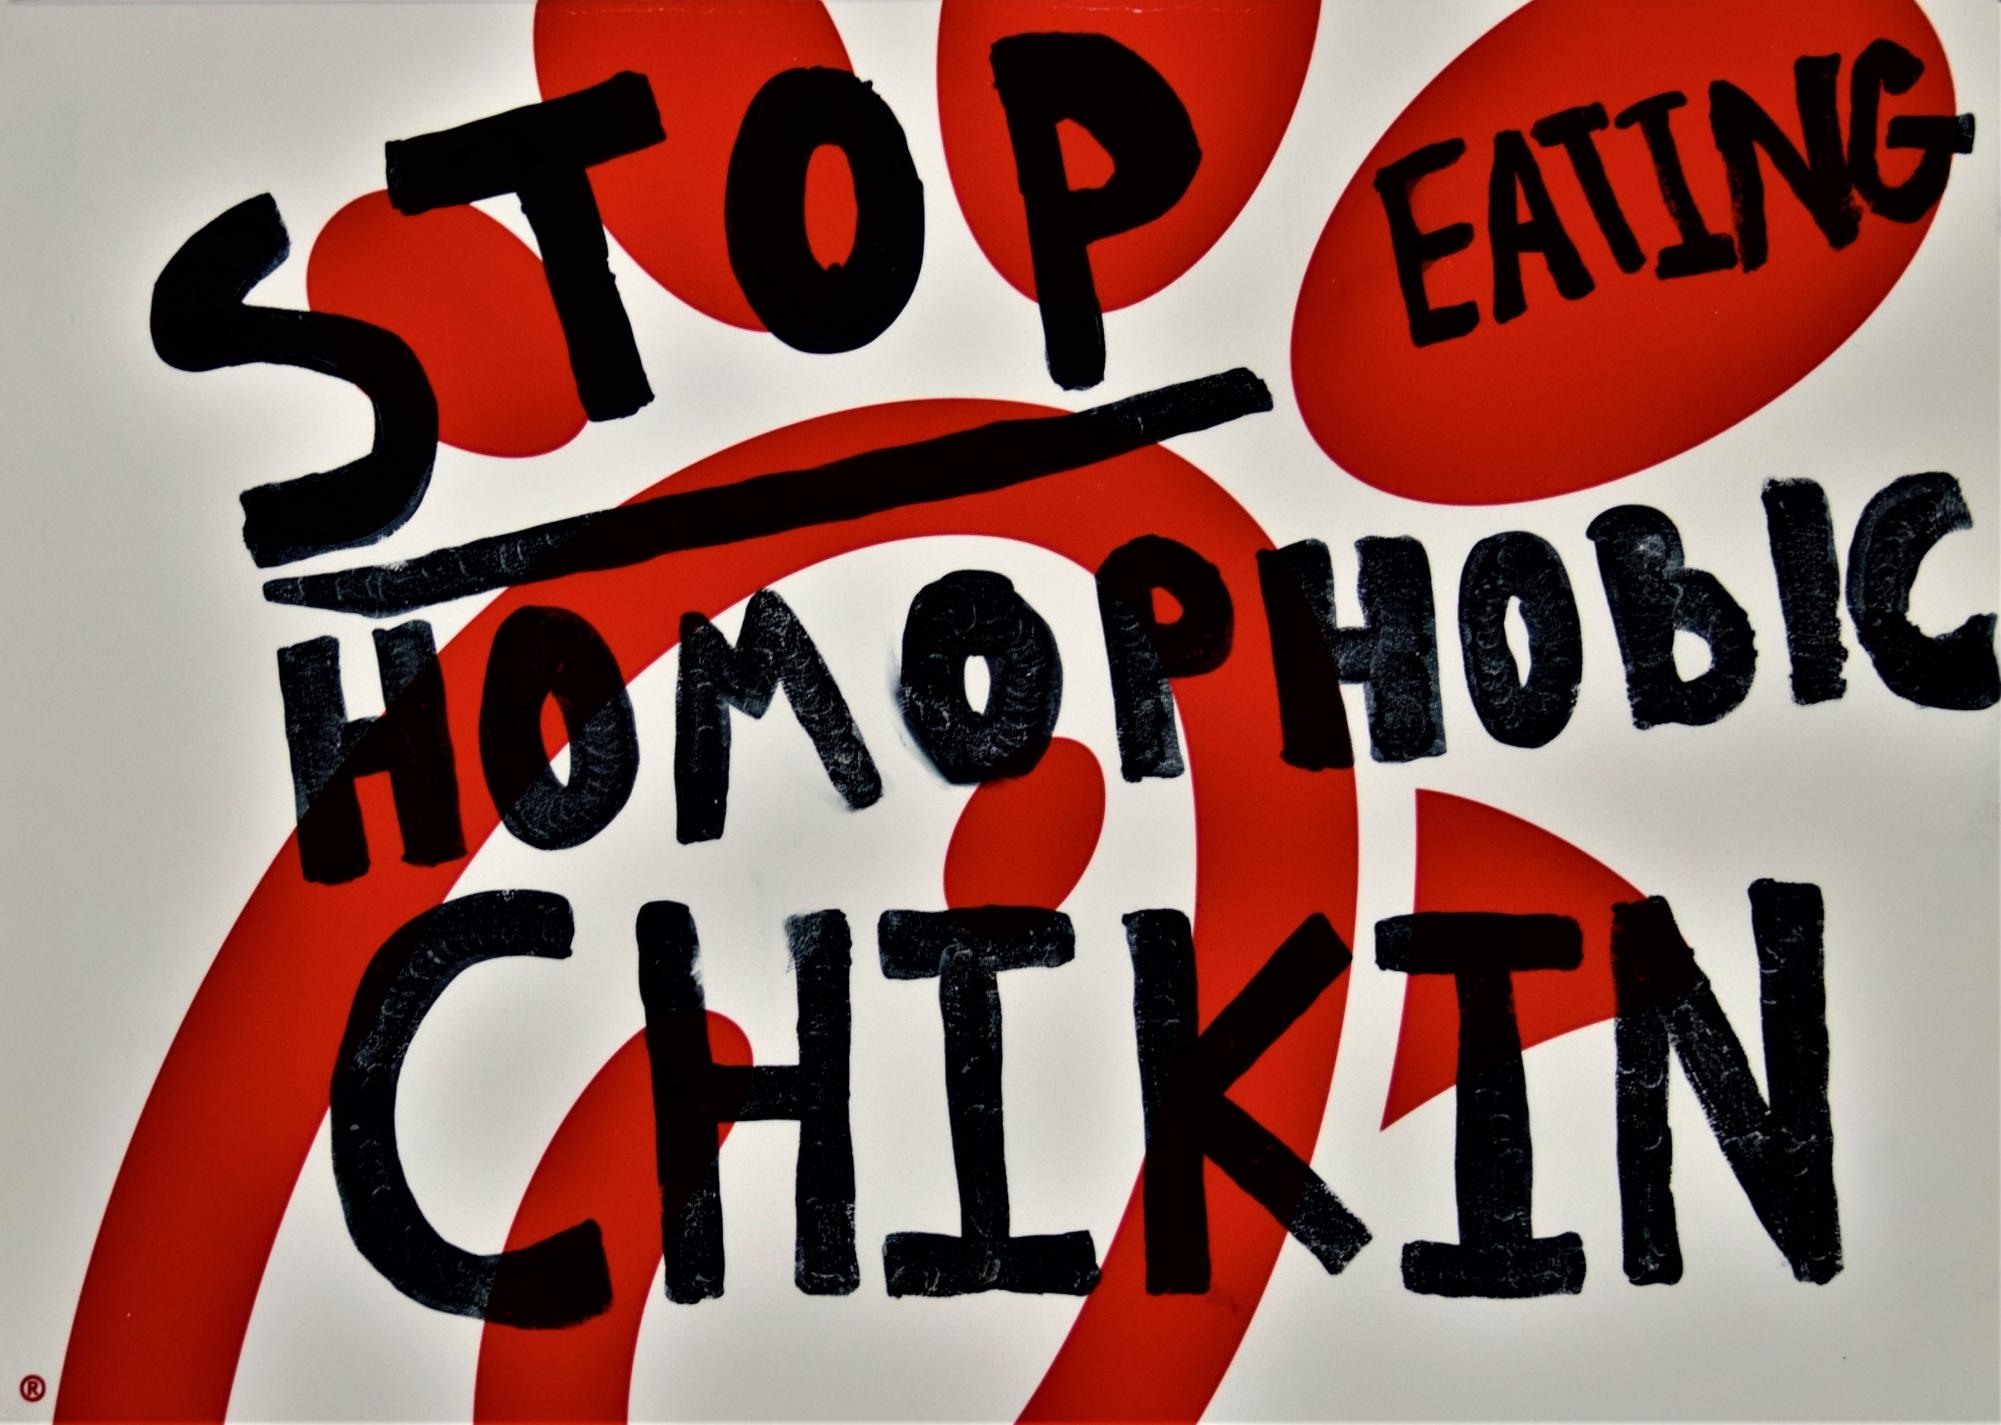 Eat Les Chikin Chick fil A s Homophobic Policies Will Leave A Bad Taste In Your Mouth Union St Journal